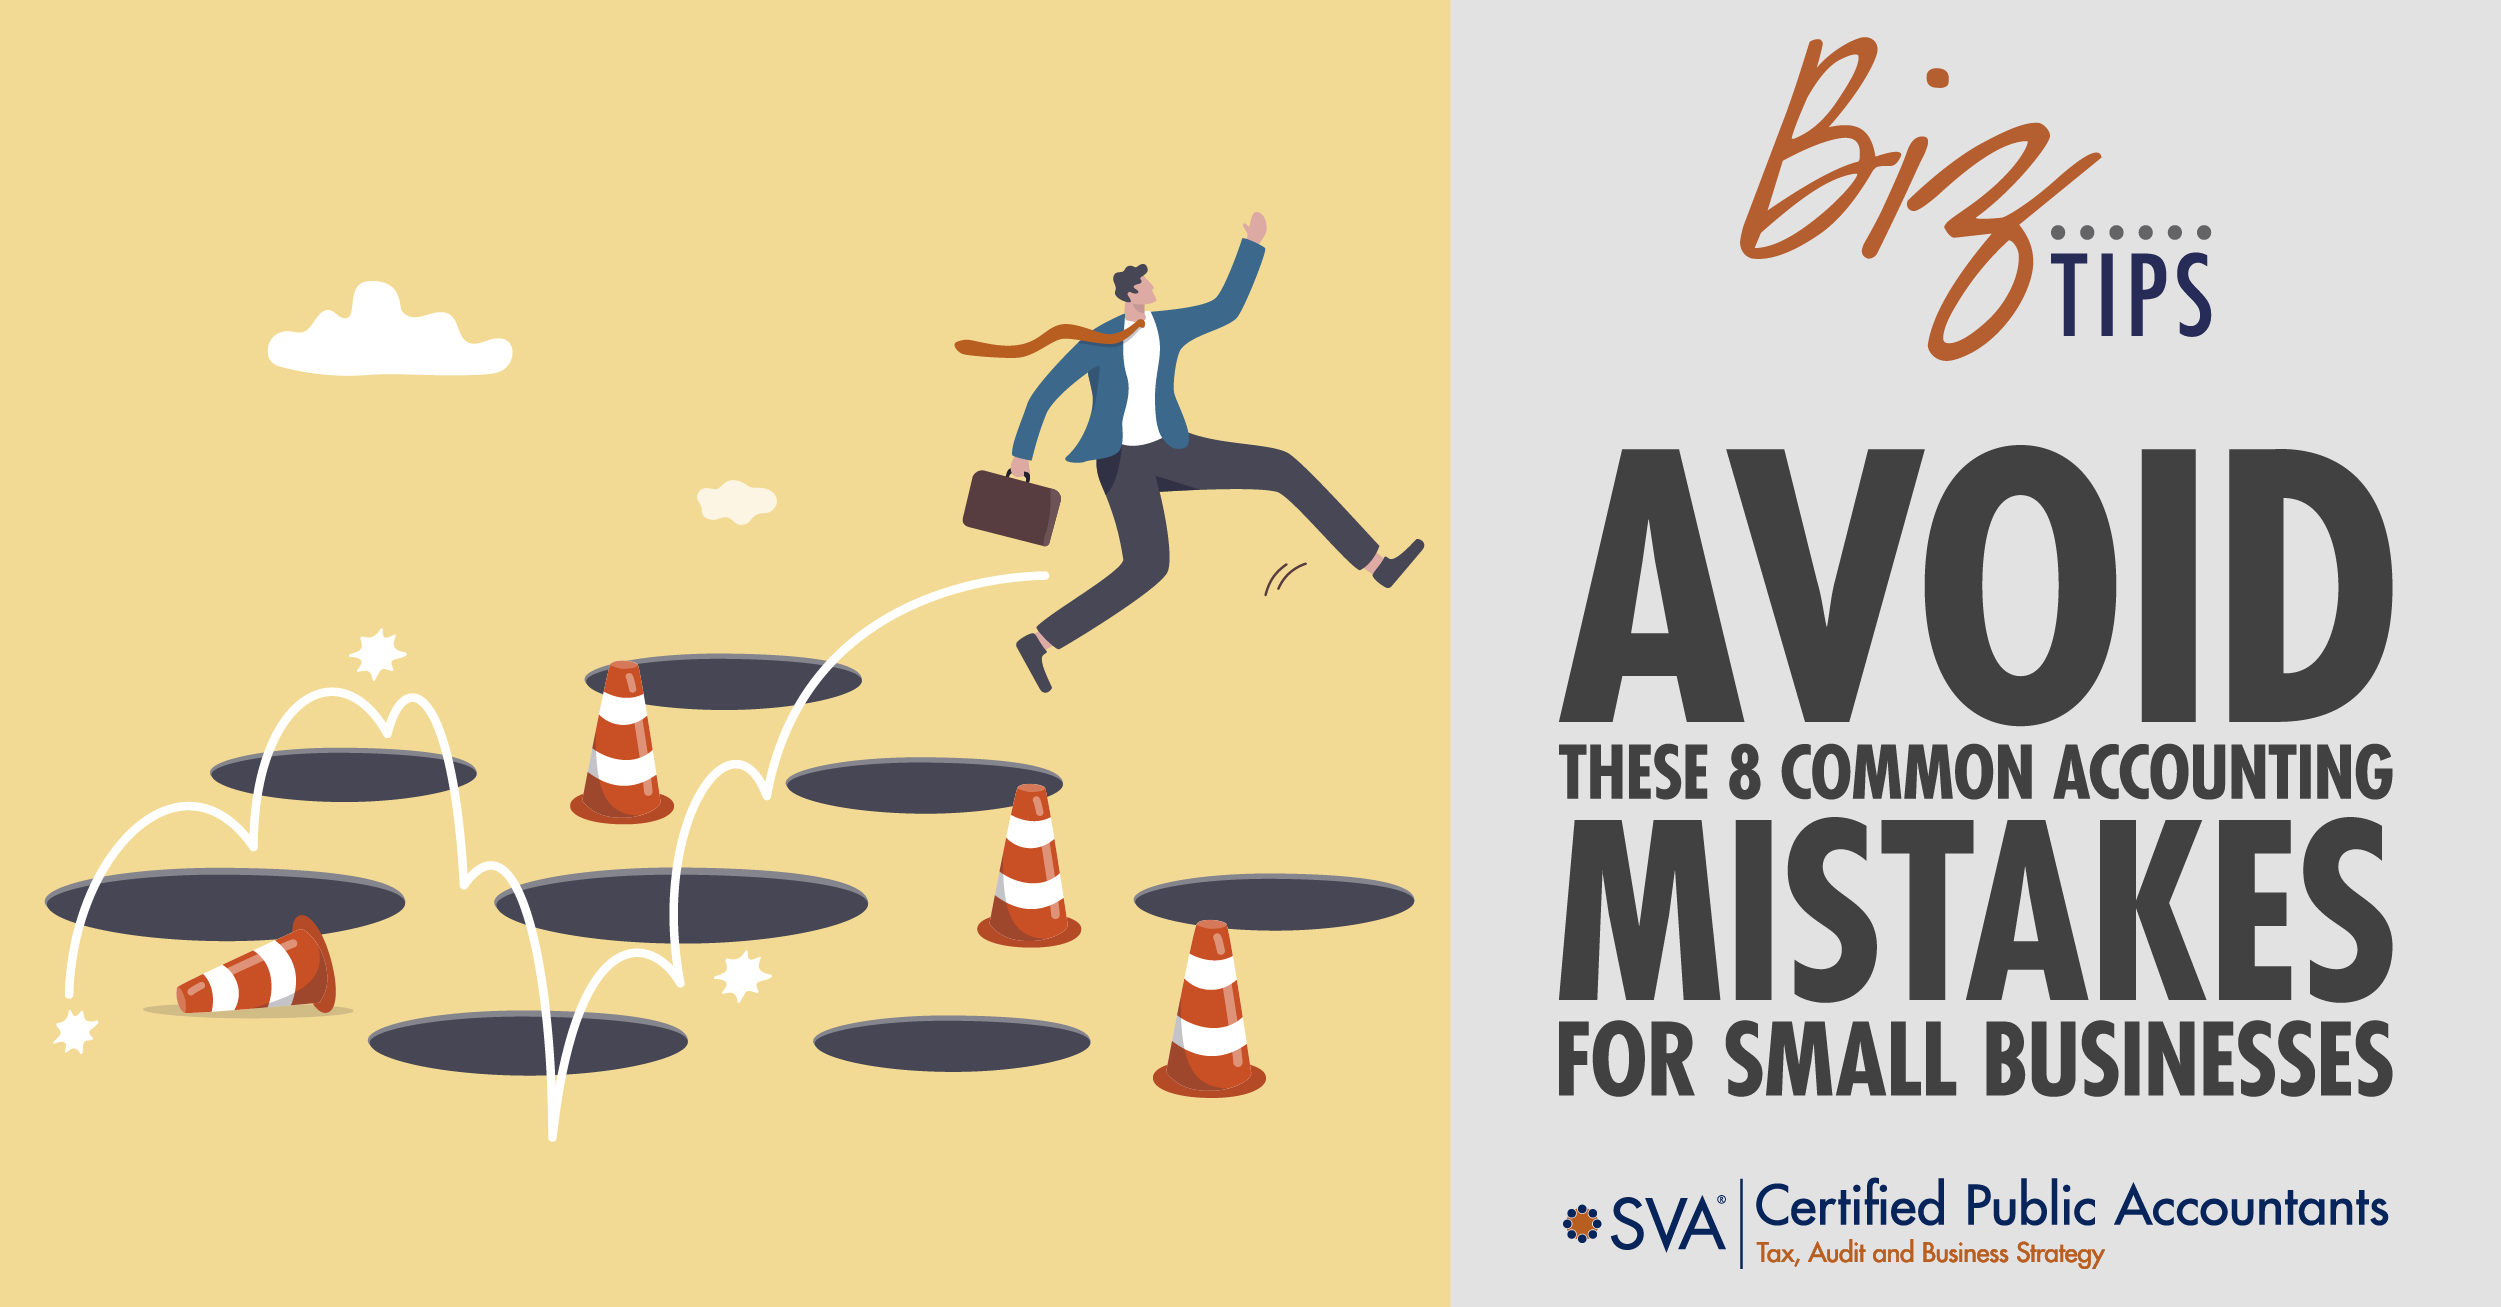 Avoid These 8 Common Accounting Mistakes for Small Businesses